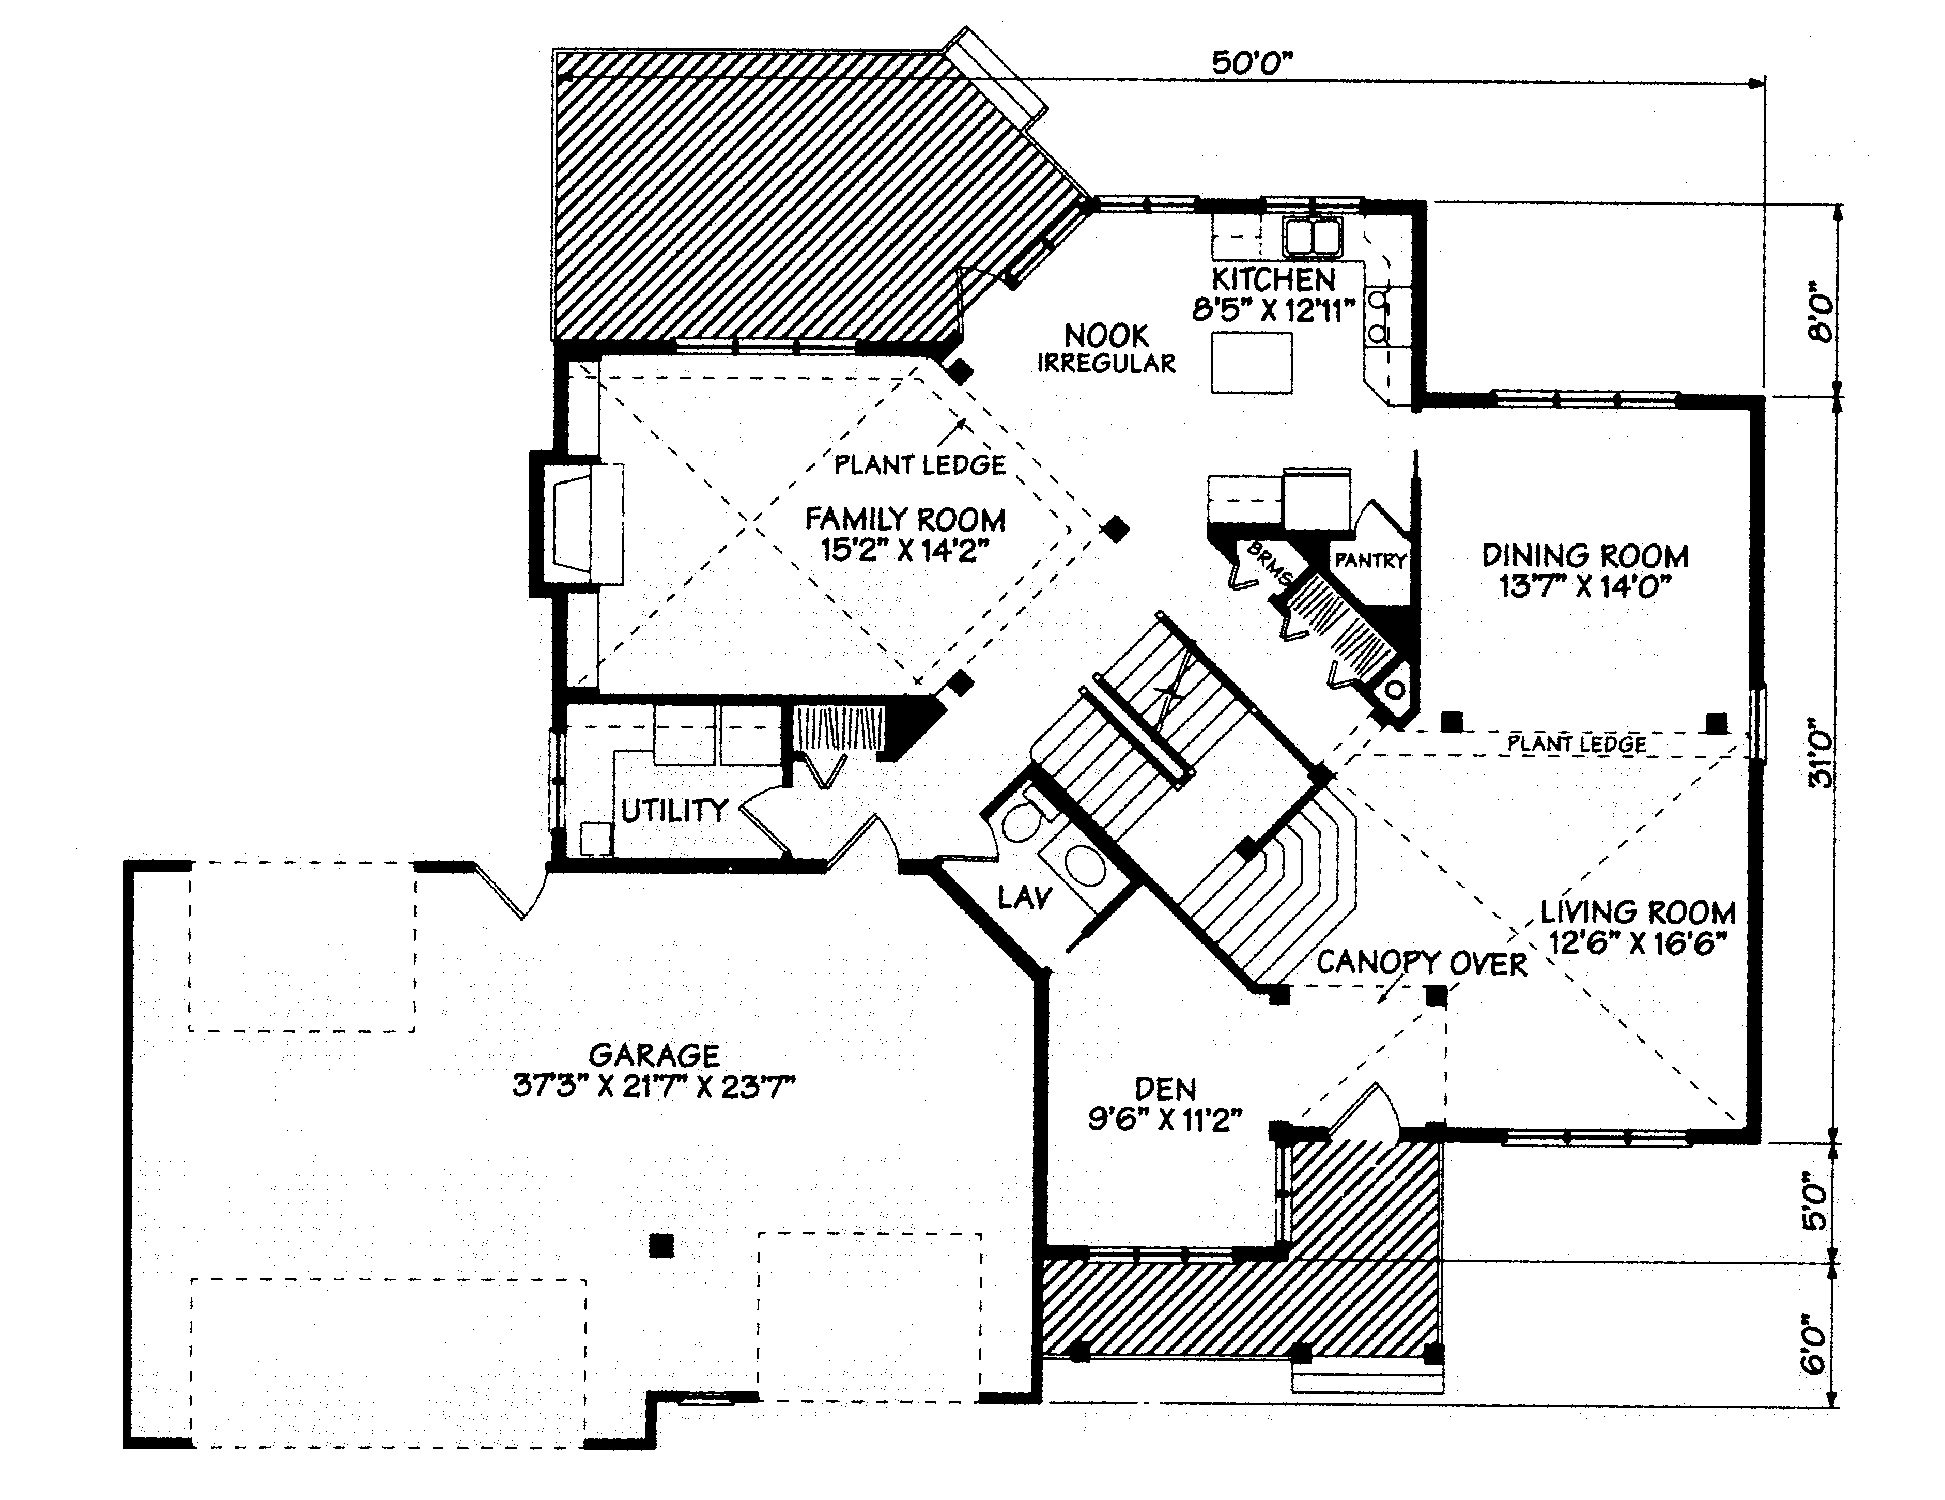 house plans modular ready to move homes prefabricated homes by nelson homes.jpg